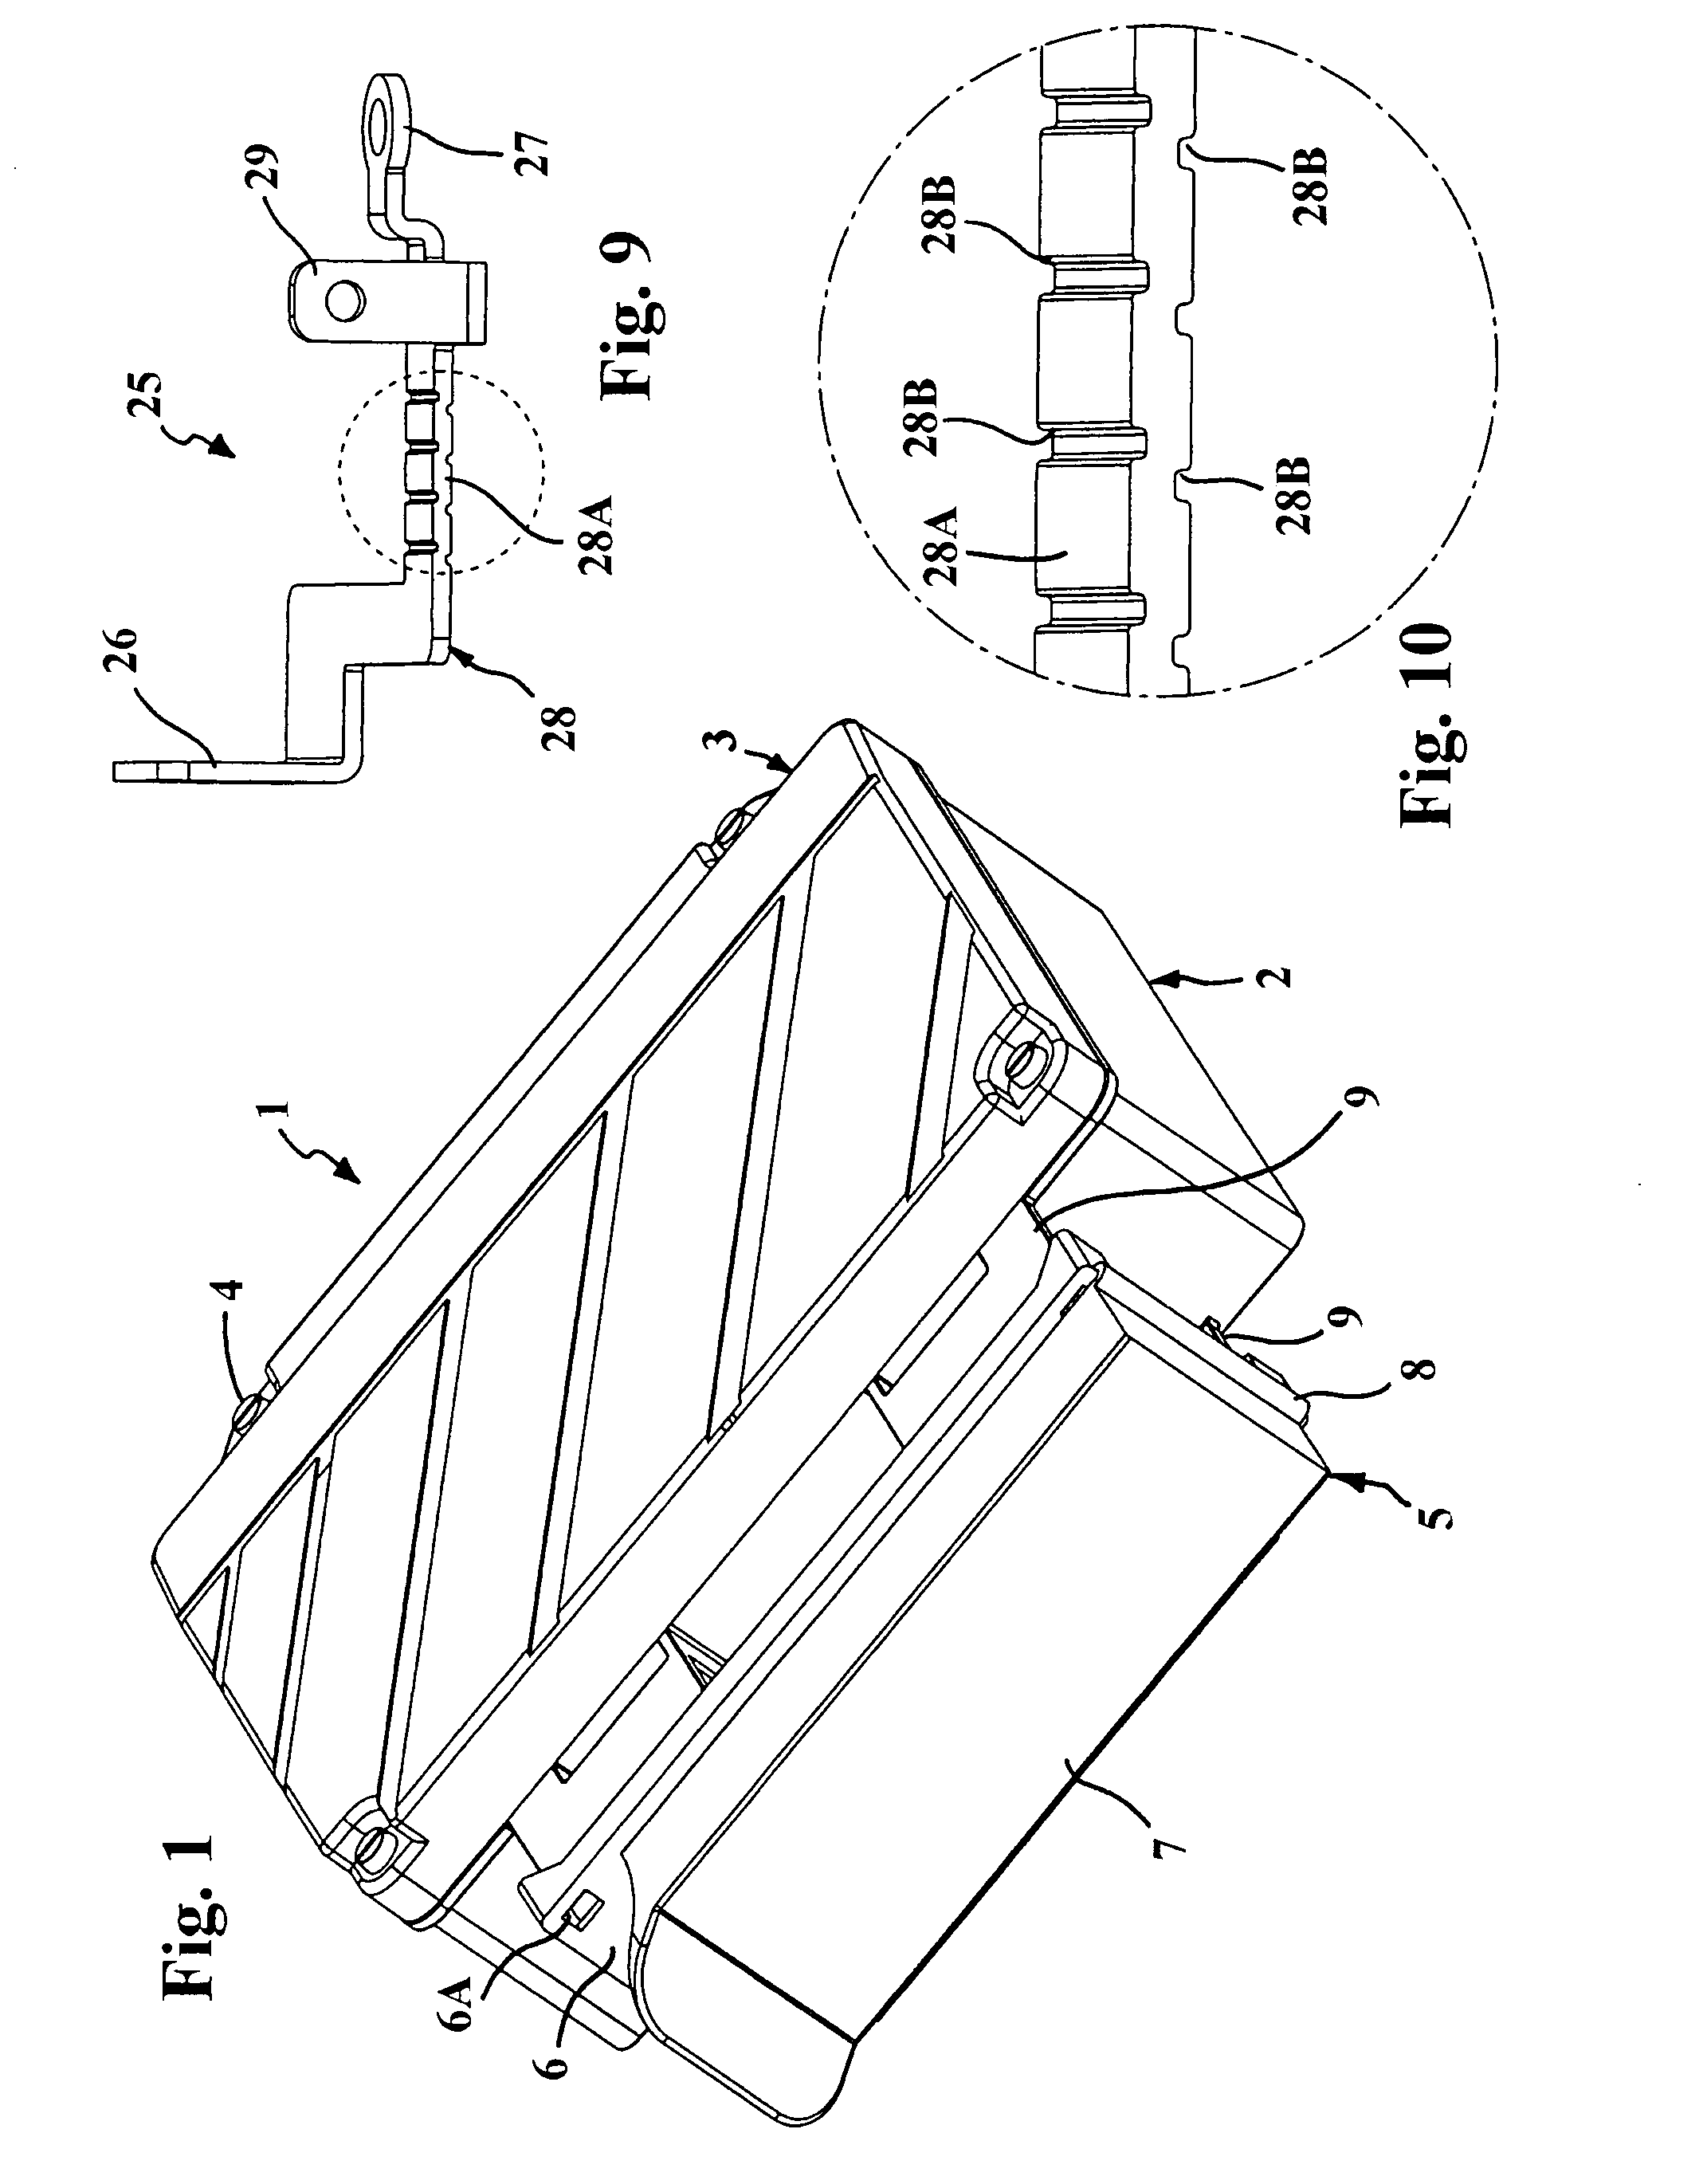 Protection system of a vehicle battery